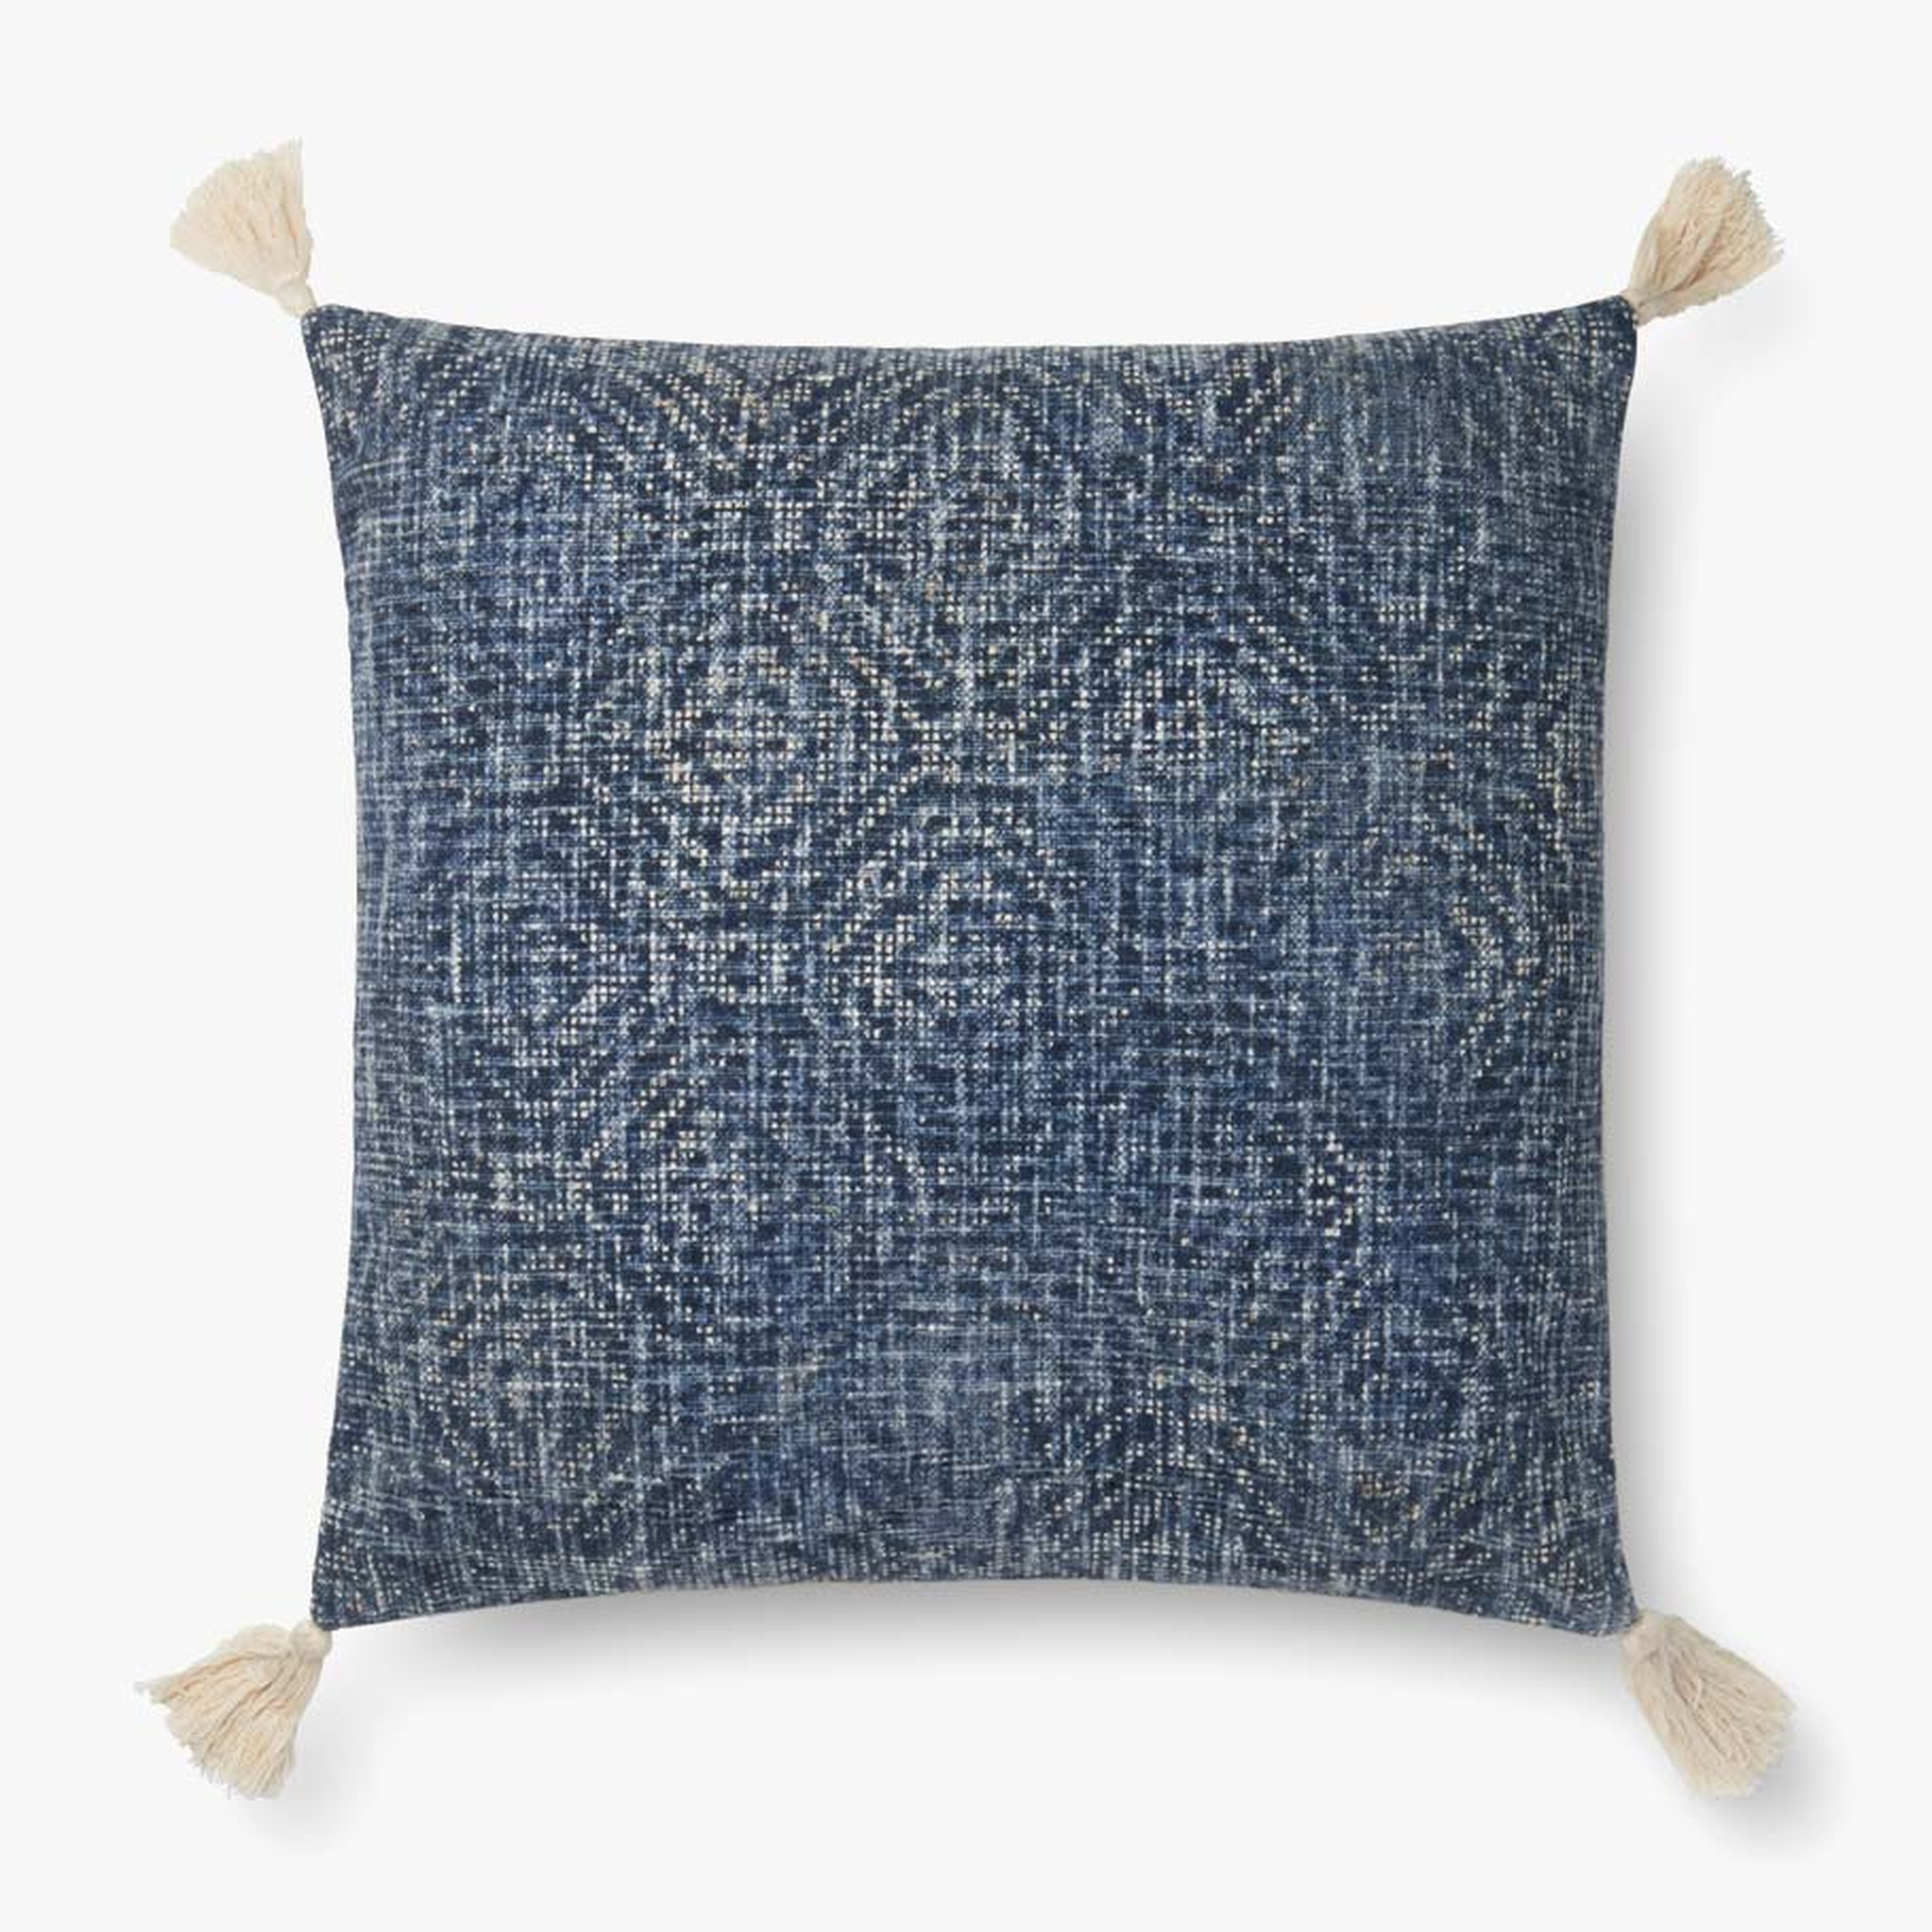 Loloi Pillows P0621 Blue 22" x 22" Cover w/Poly - Loloi Rugs